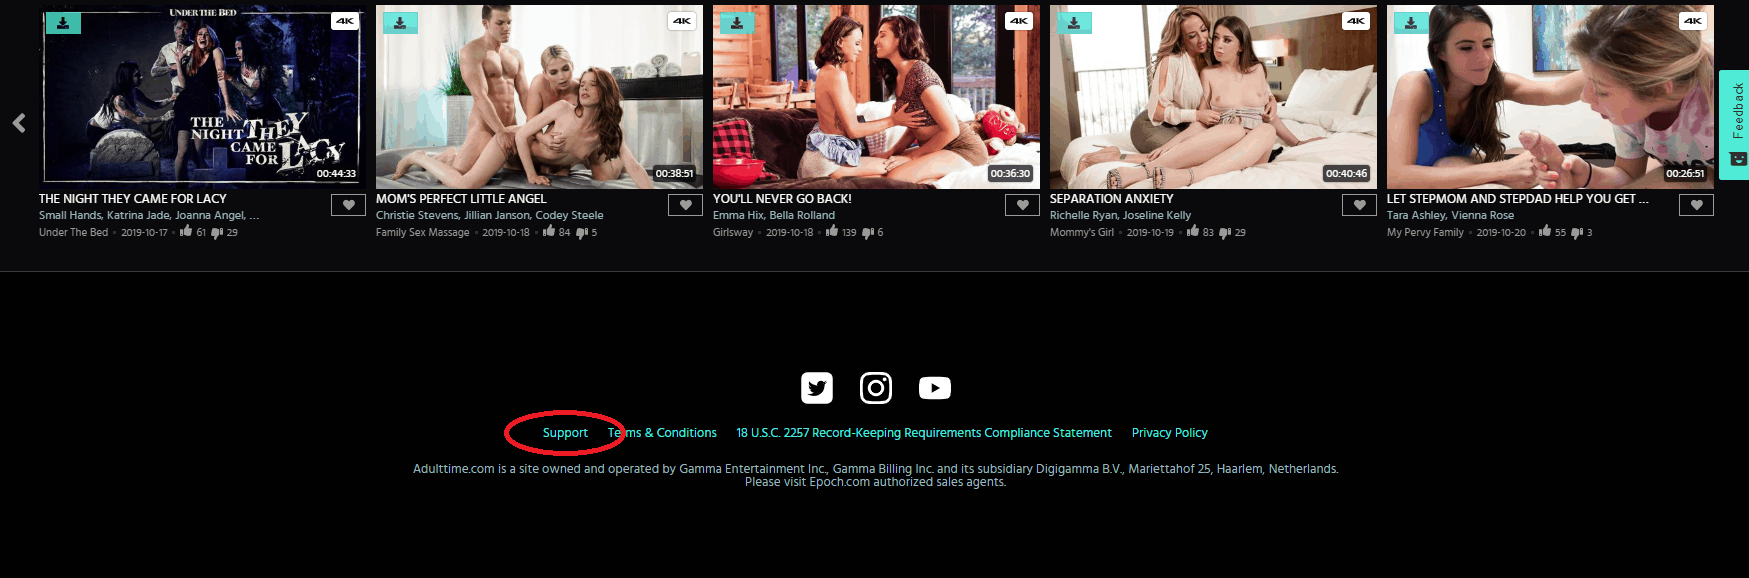 Porn Subscription - How To Cancel Adult Time Memberships. Full Guide! - The Hareald